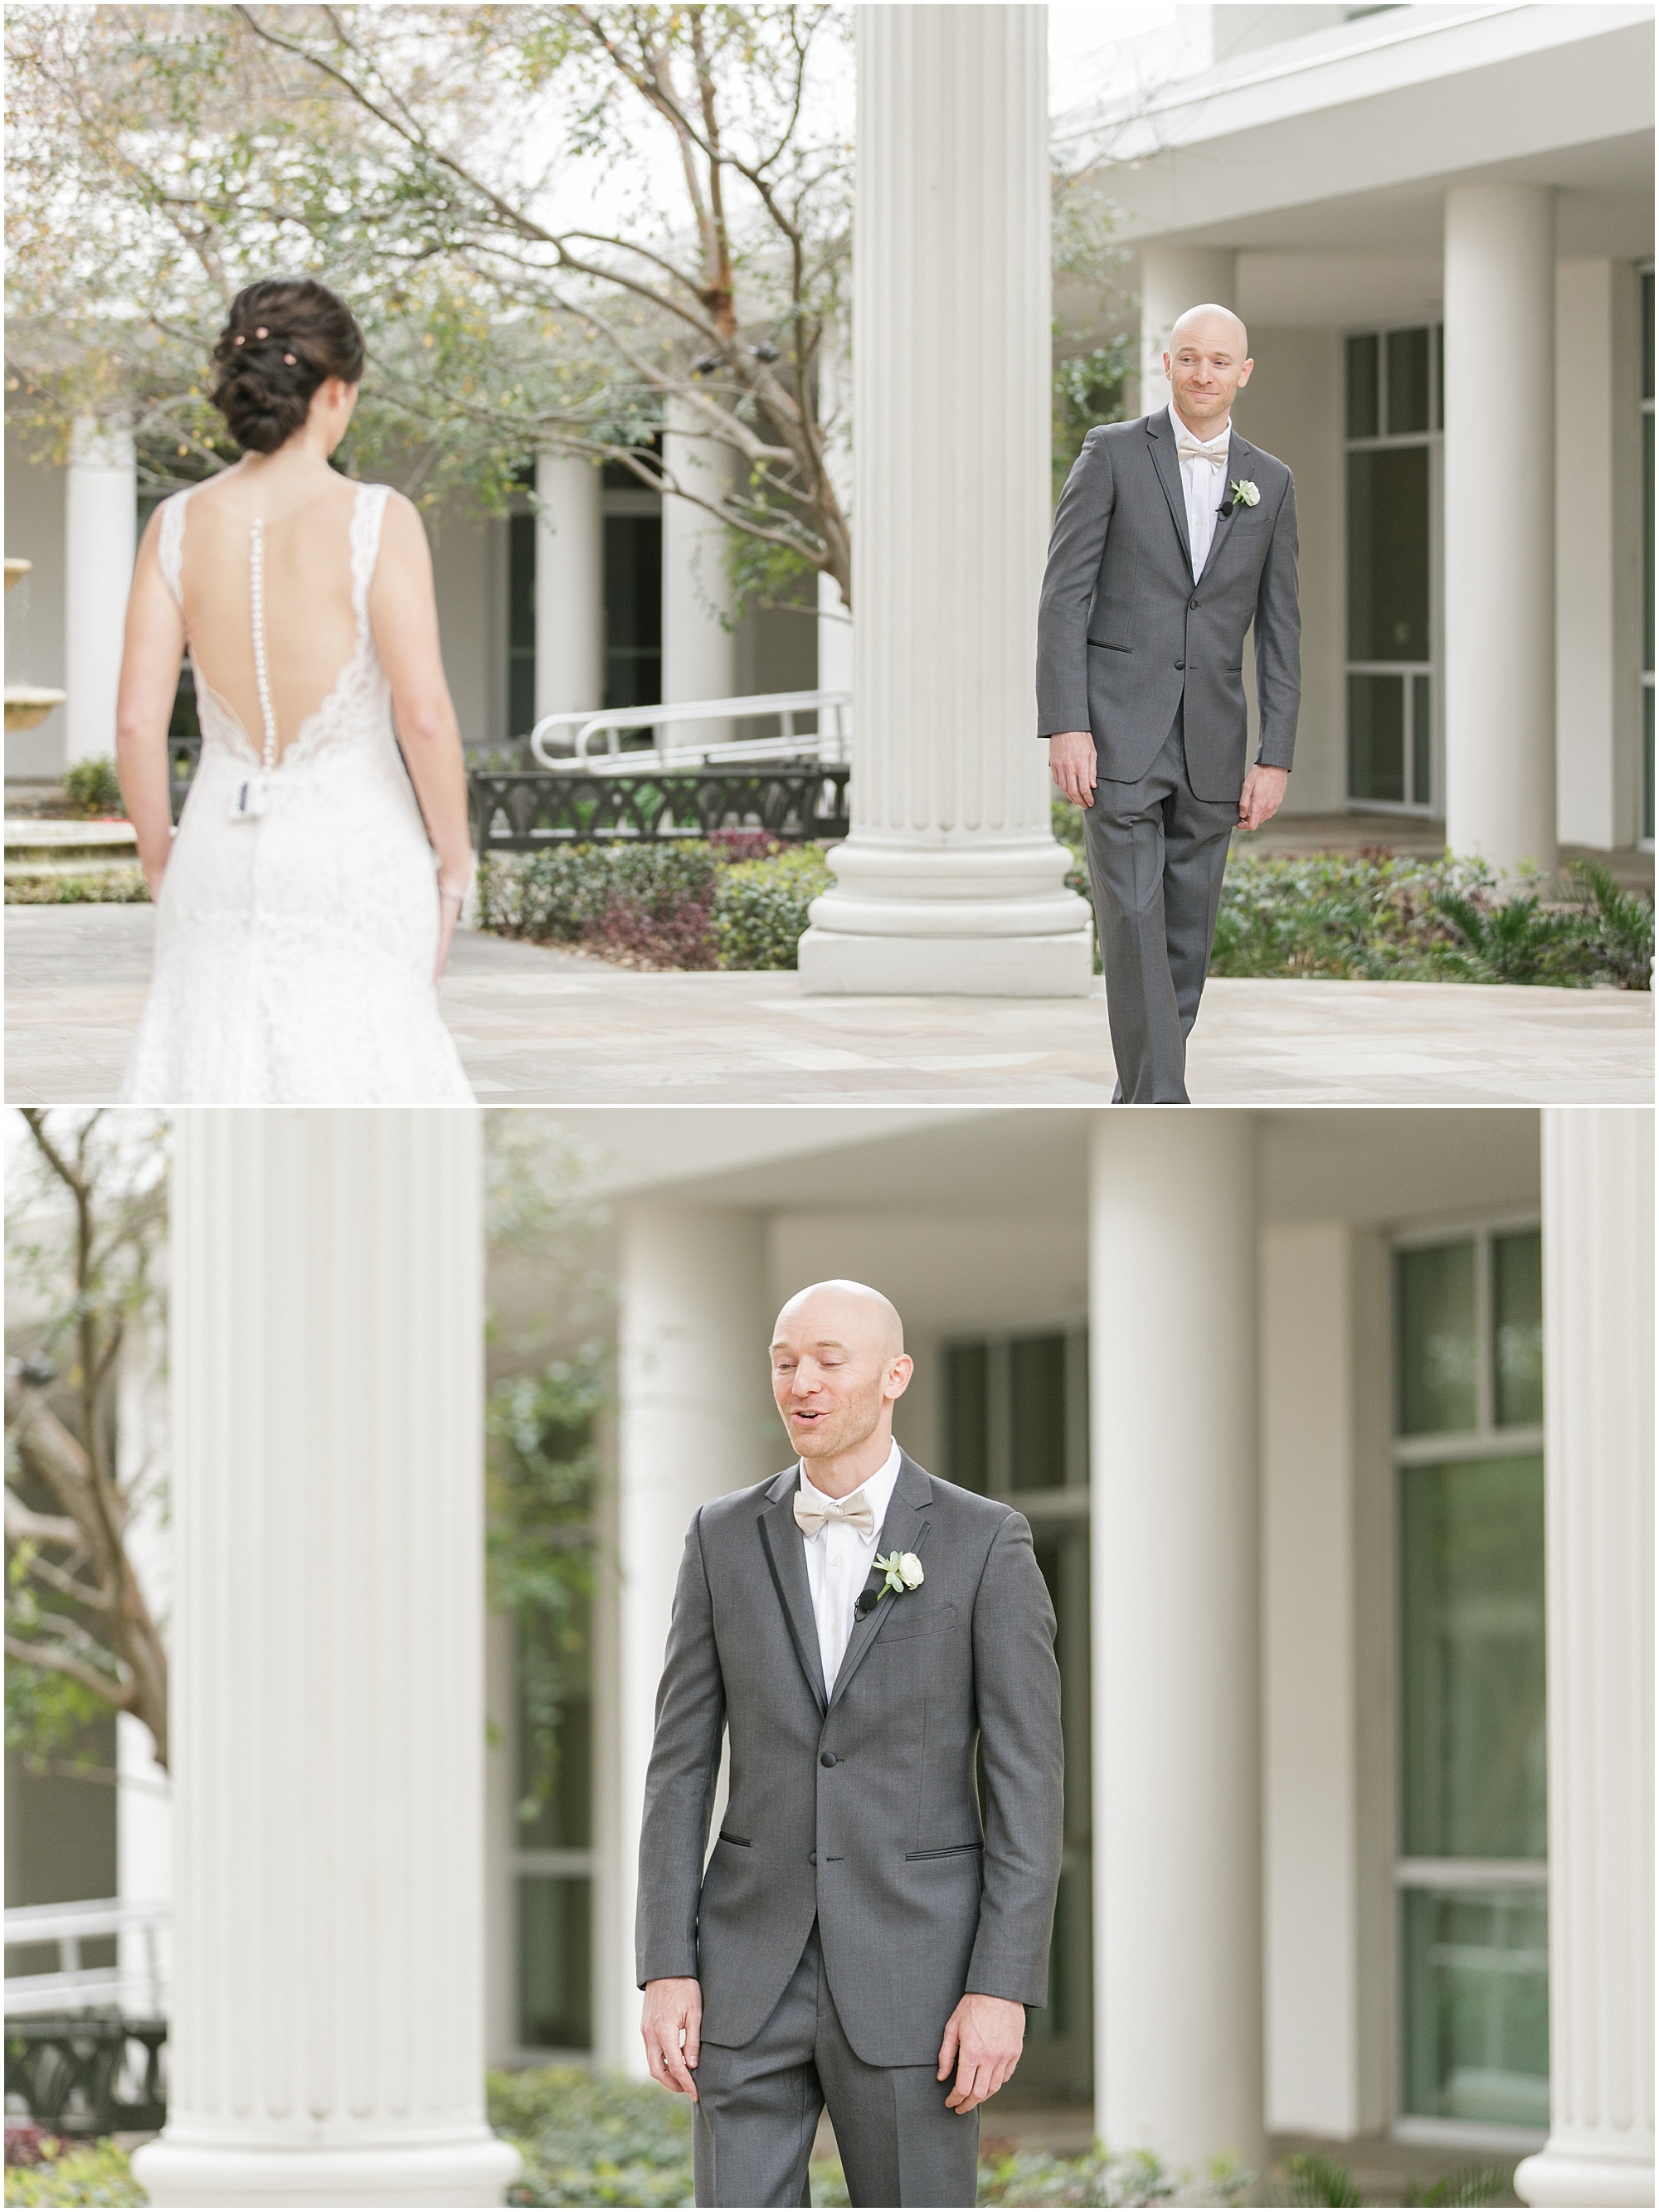 Groom is shocked when he turns around and sees his bride for the first time.